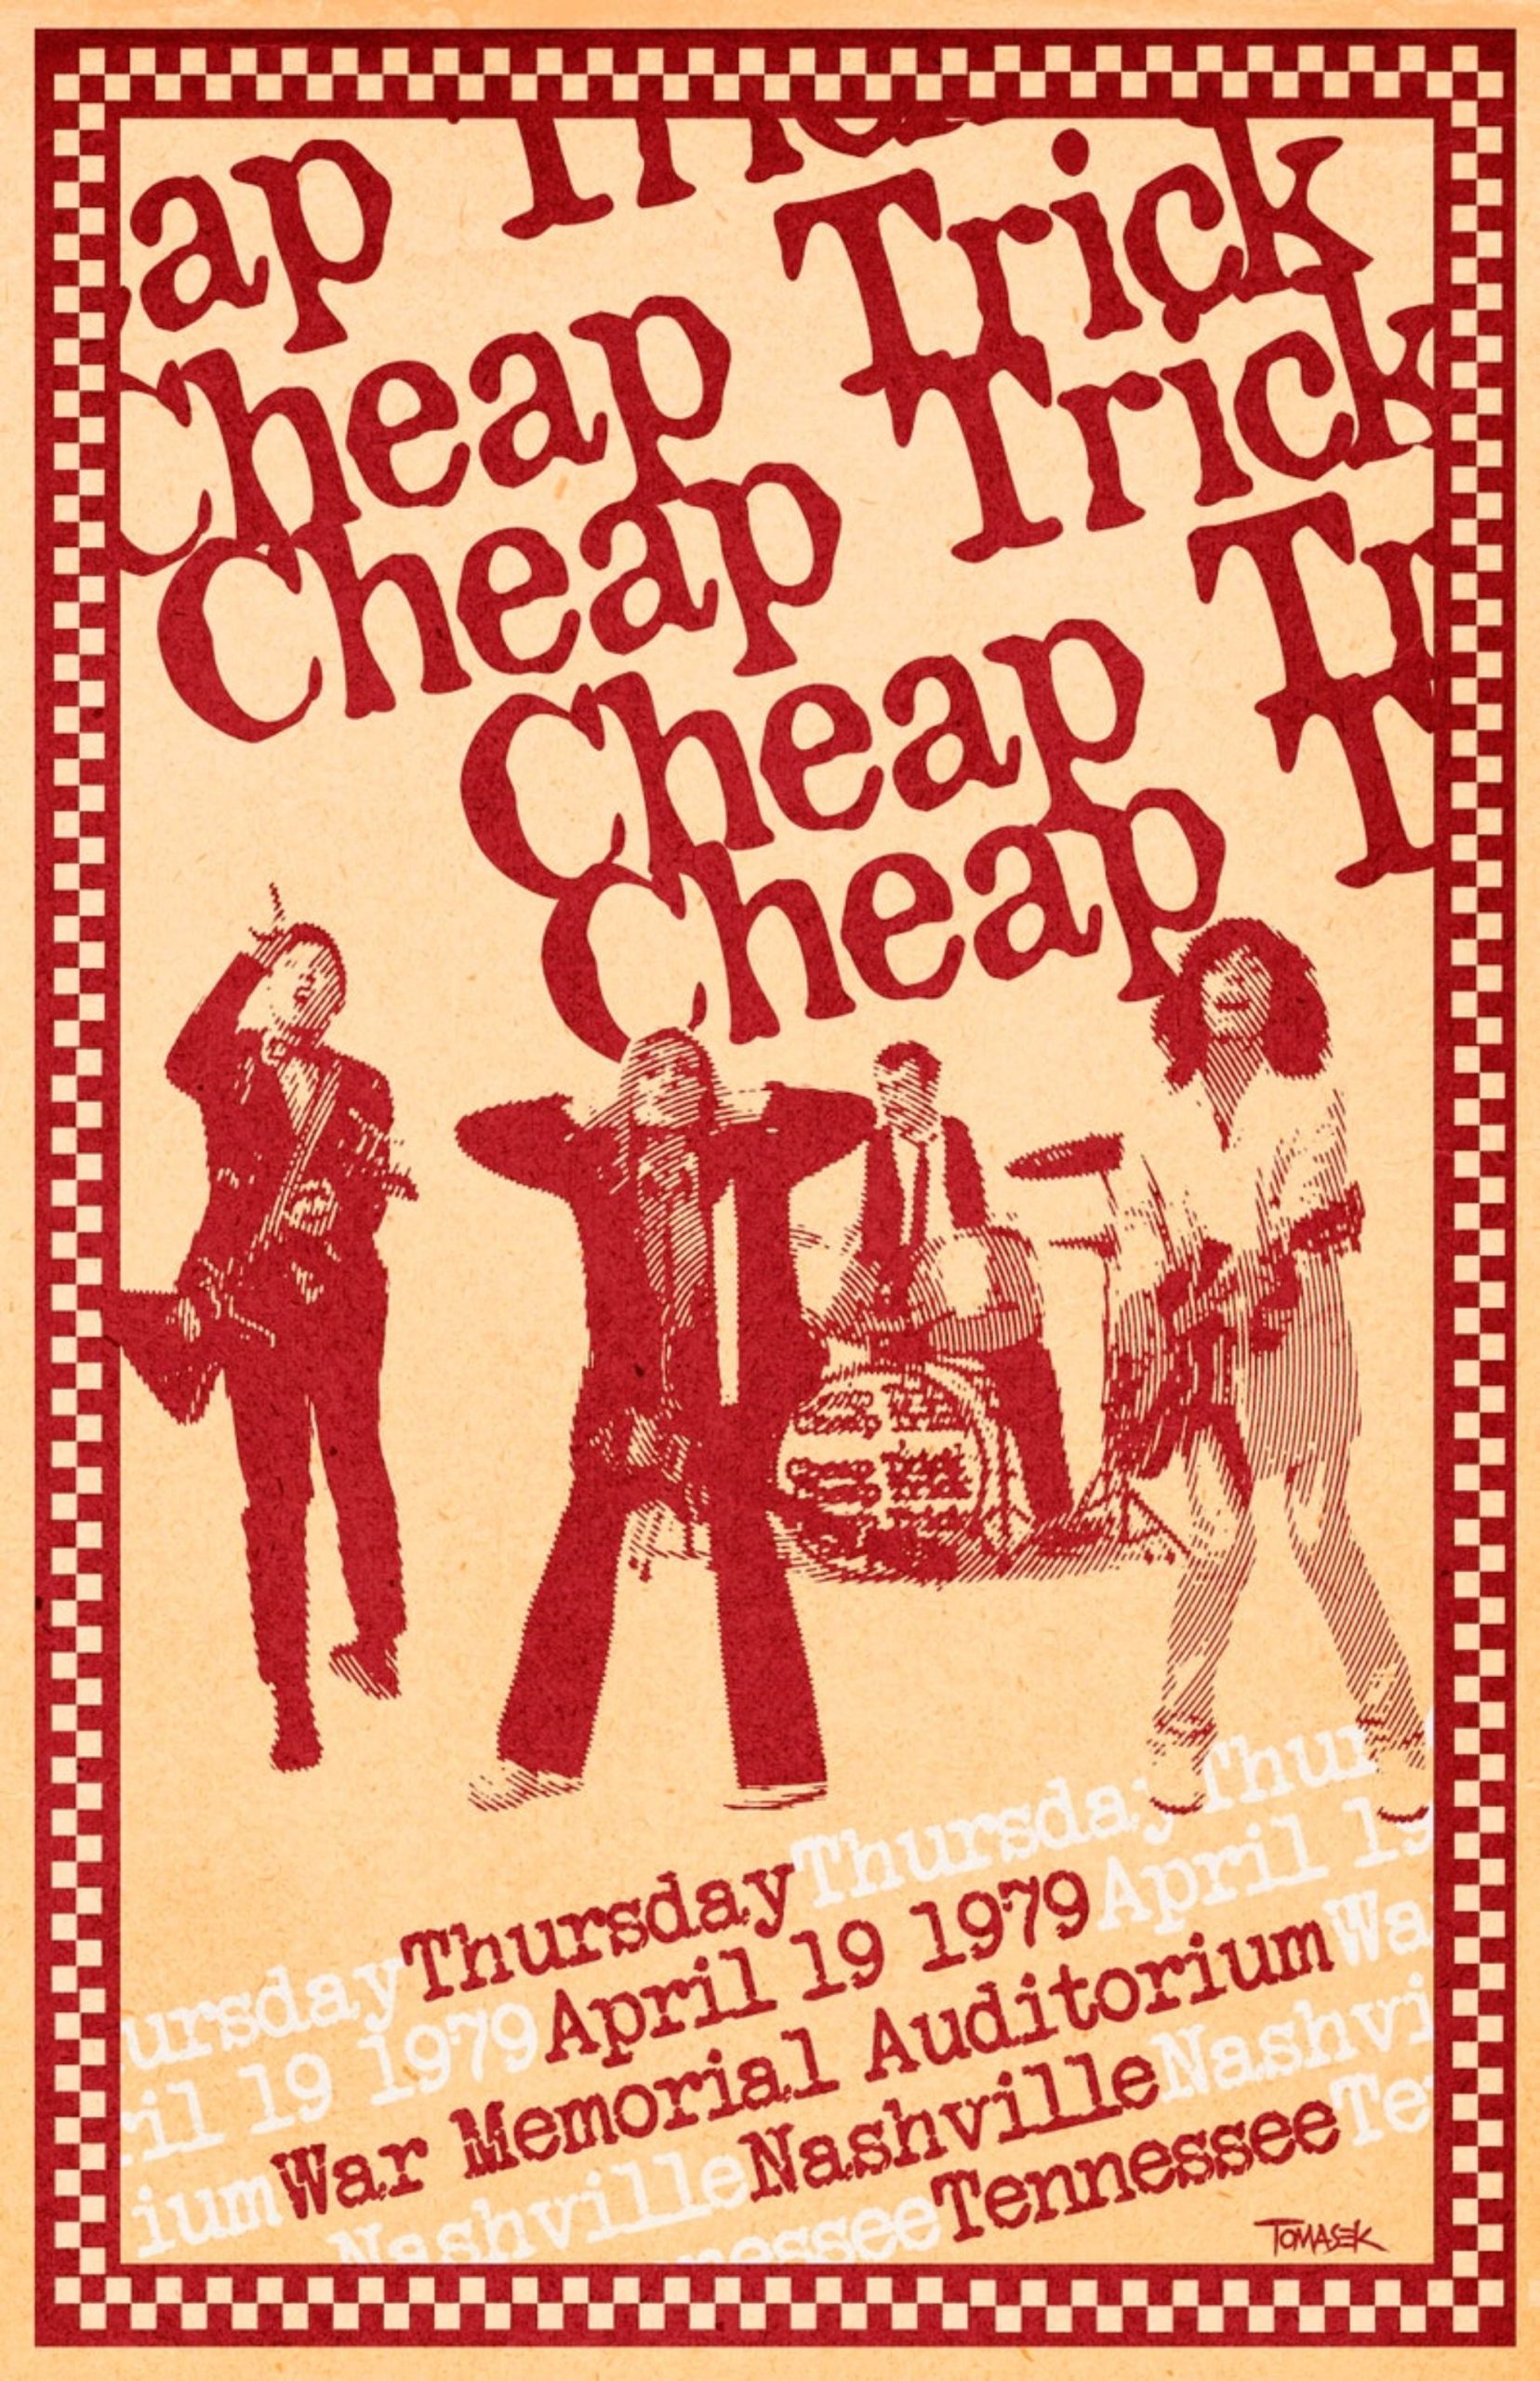 Cheap Trick Vintage Concert Poster from University of Guam, Oct 10